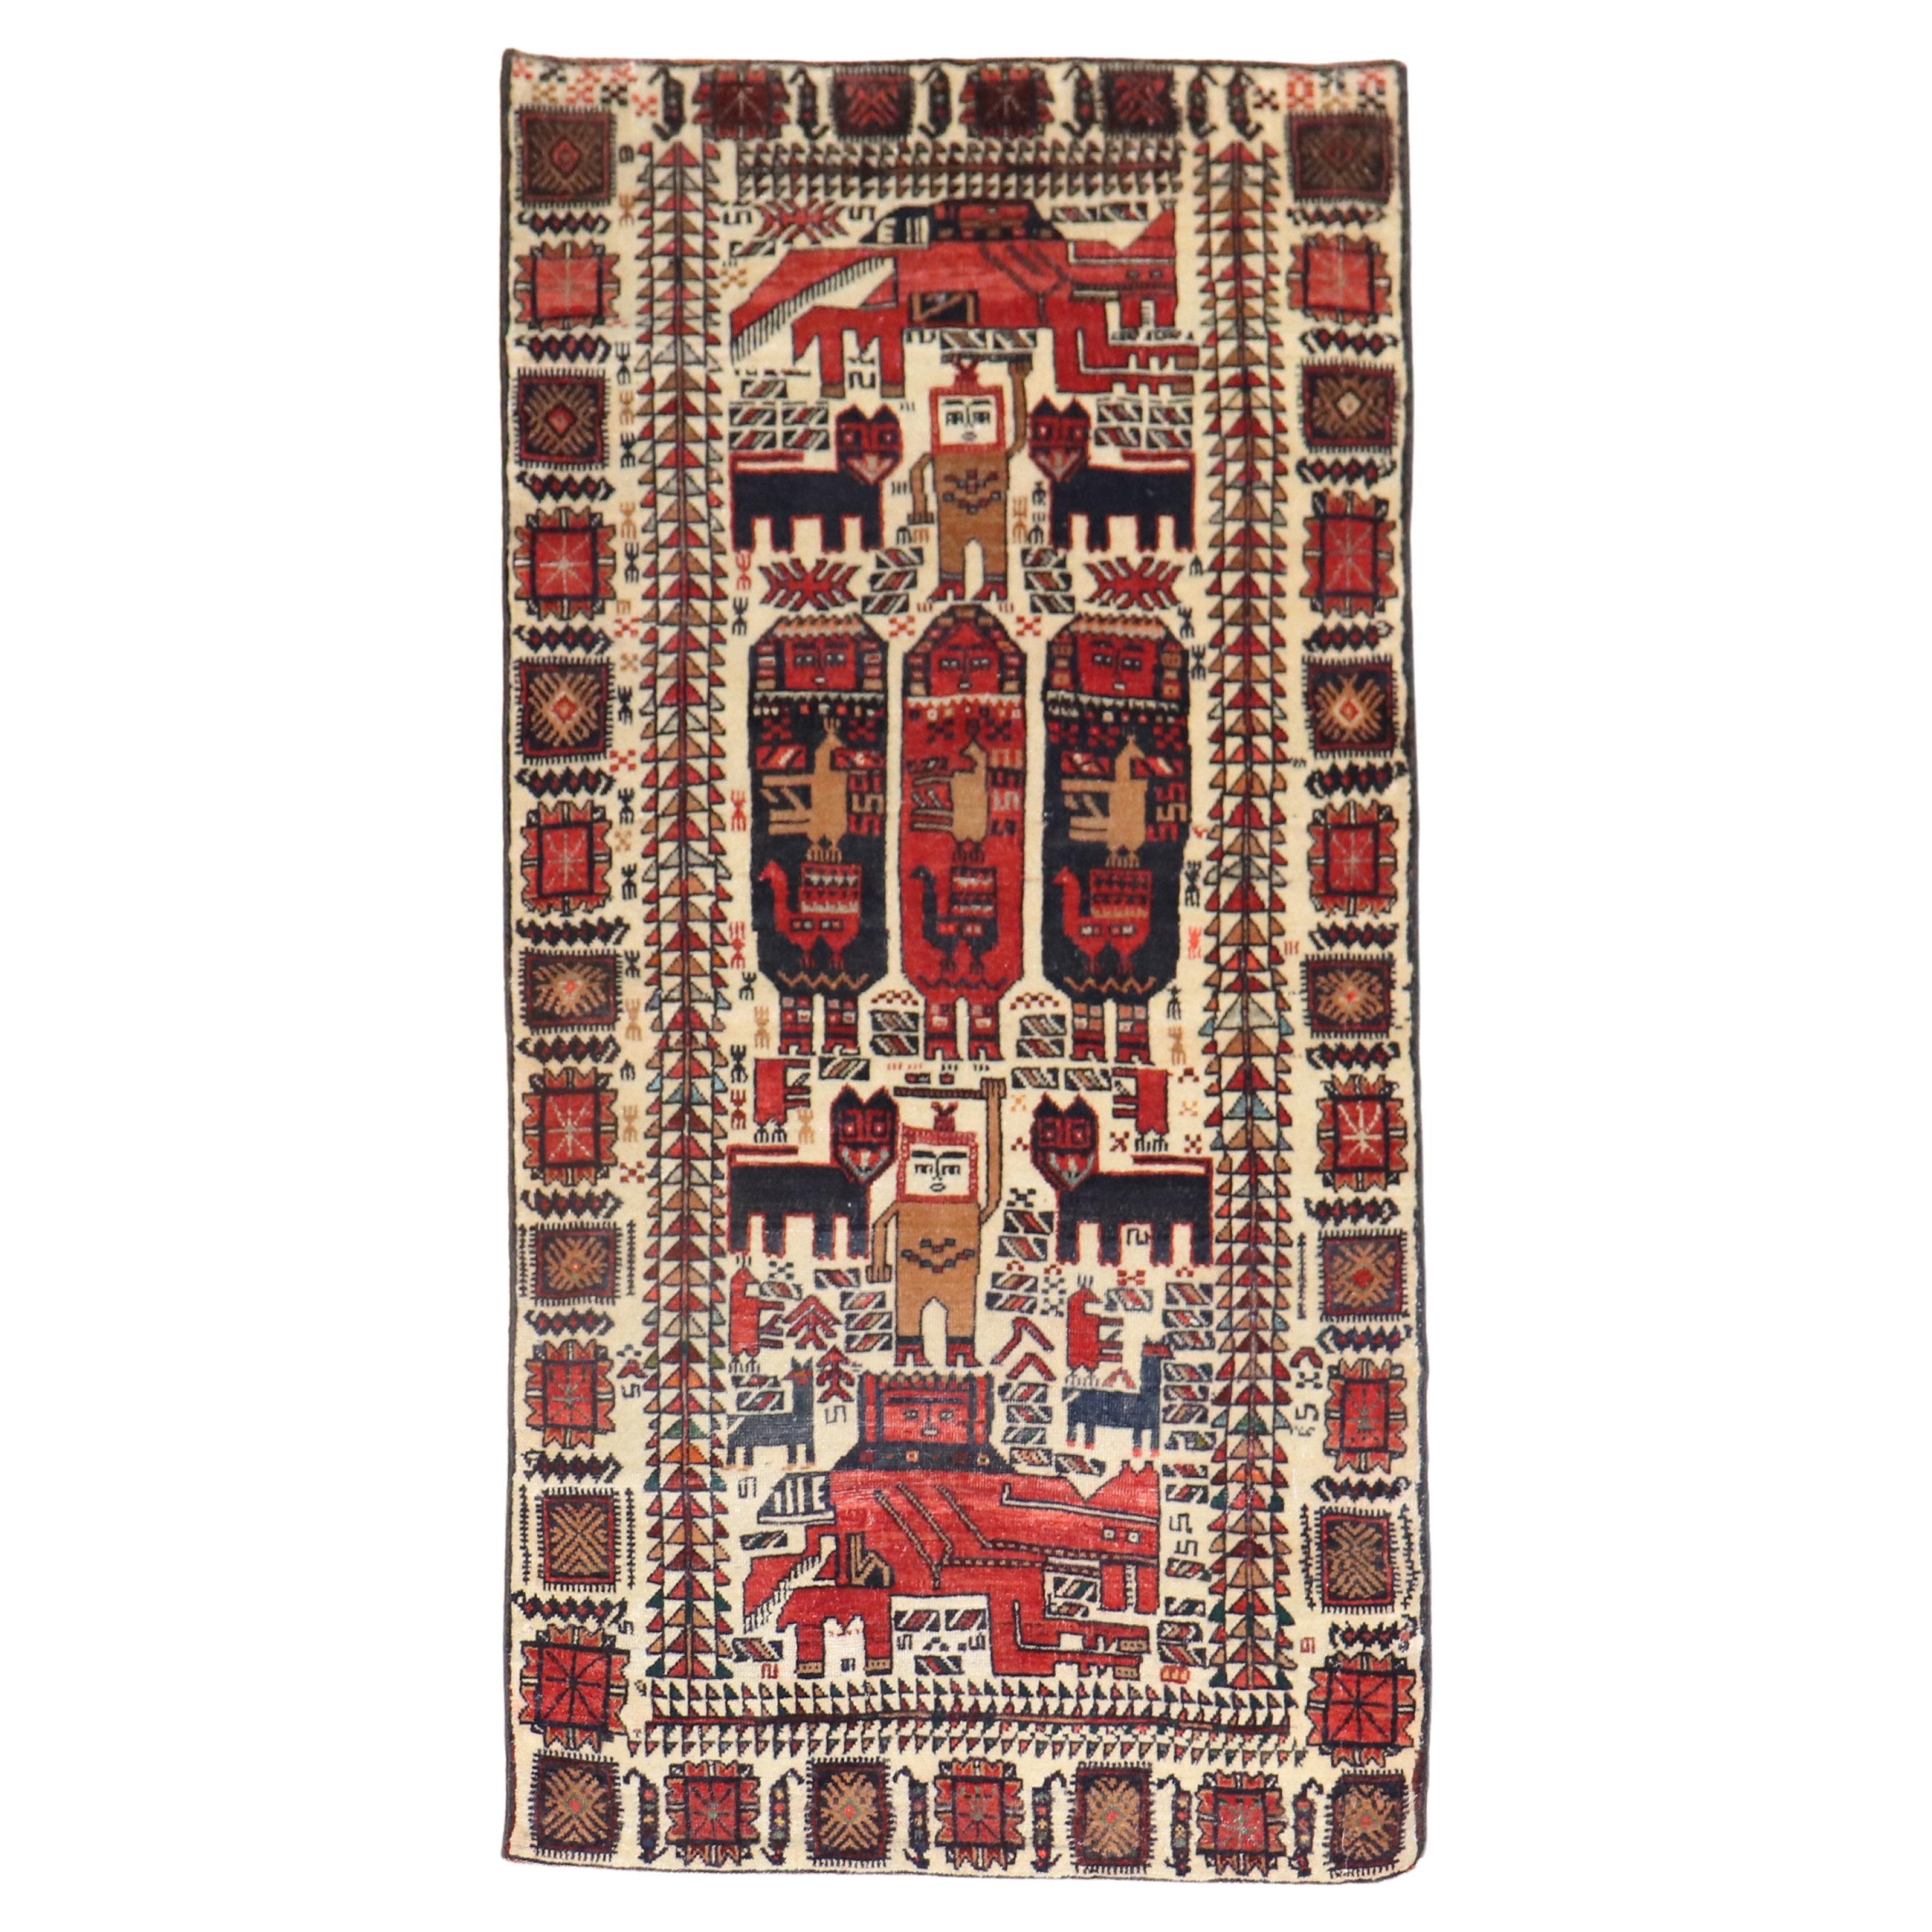 Tapis persan vintage pictural Balouch